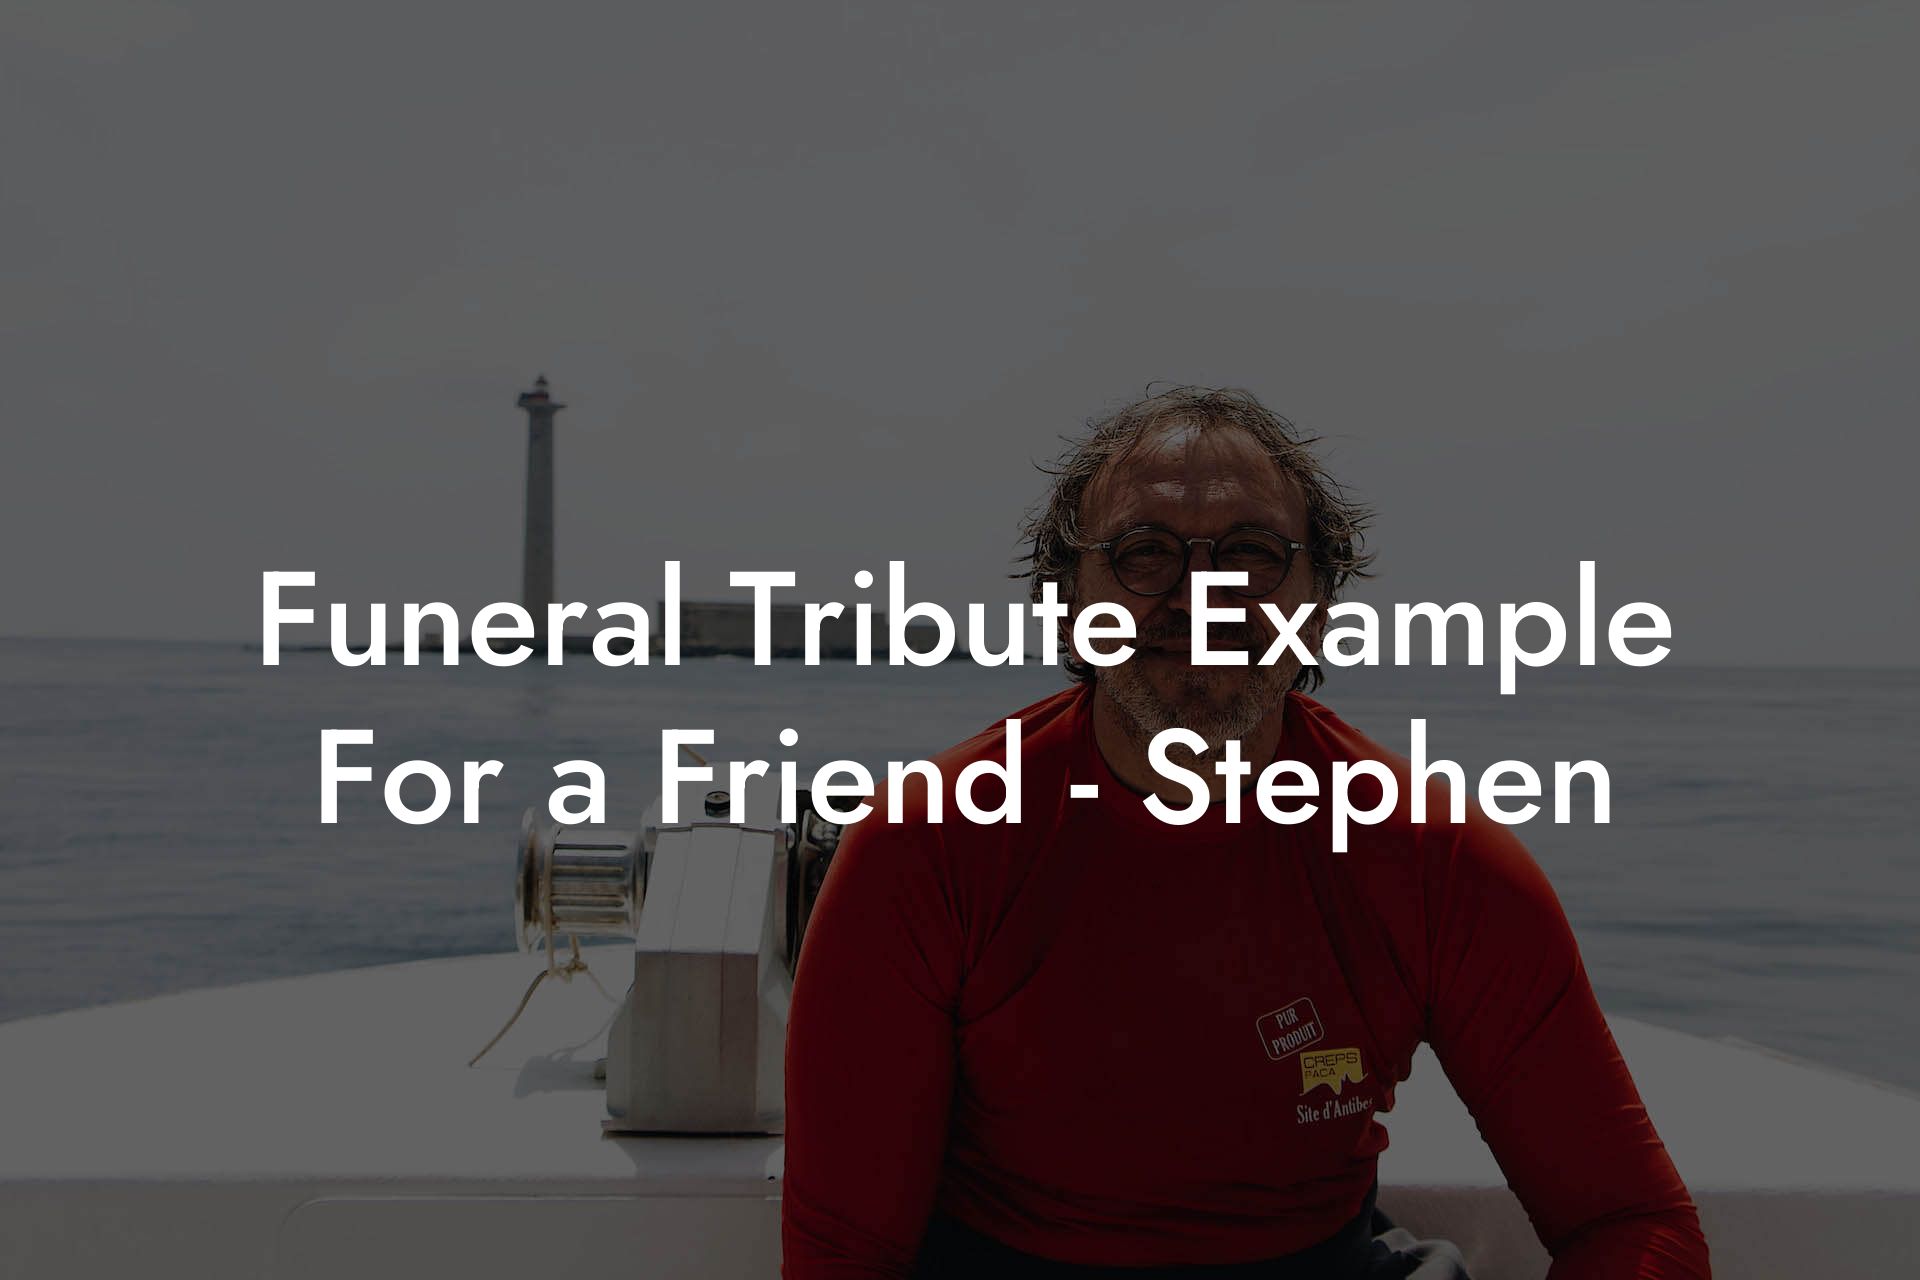 Funeral Tribute Example For a Friend - Stephen